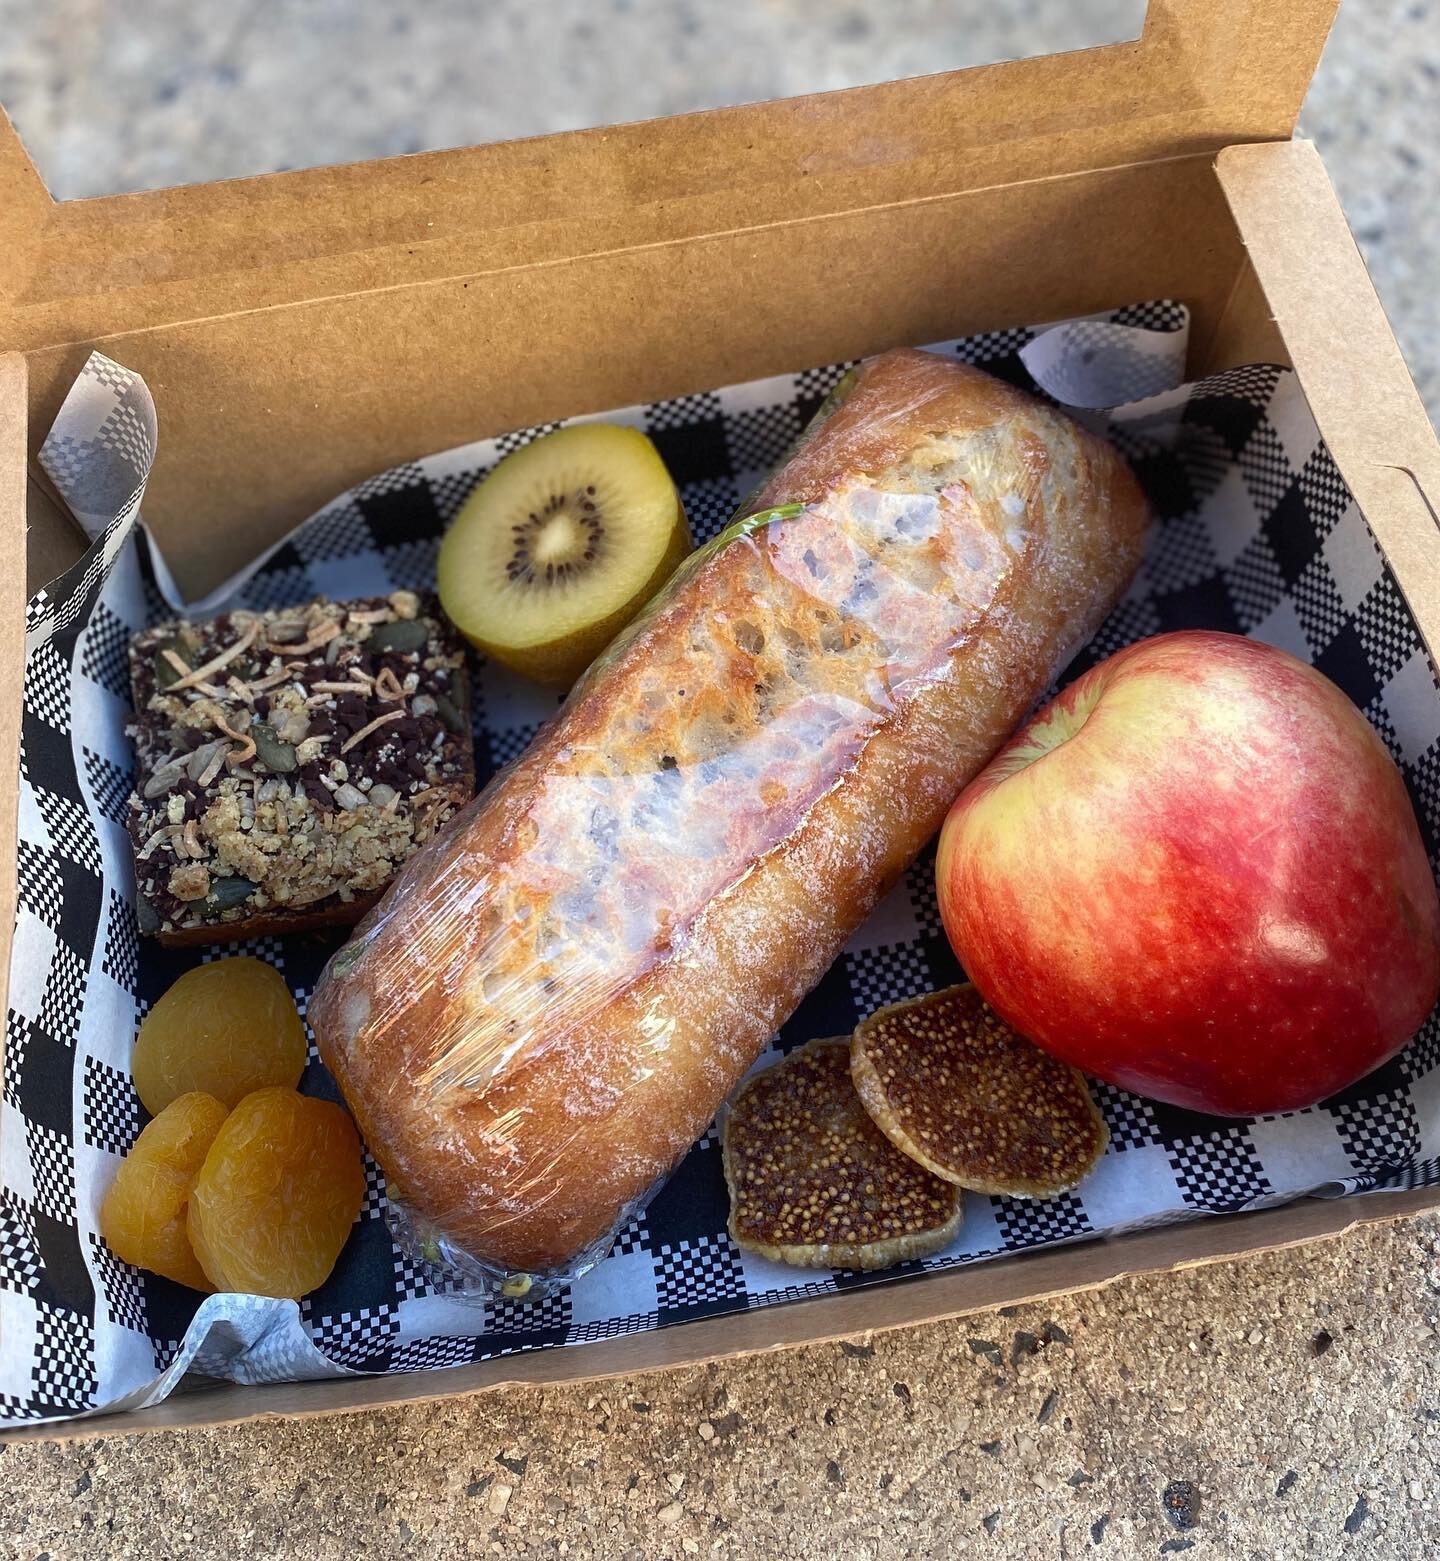 Pop in today to pick up our new &ldquo;lunch box&rdquo; 🍎 choose from a selection of seasonal fruits, sourdough baguette &amp; a healthy treat 🍫